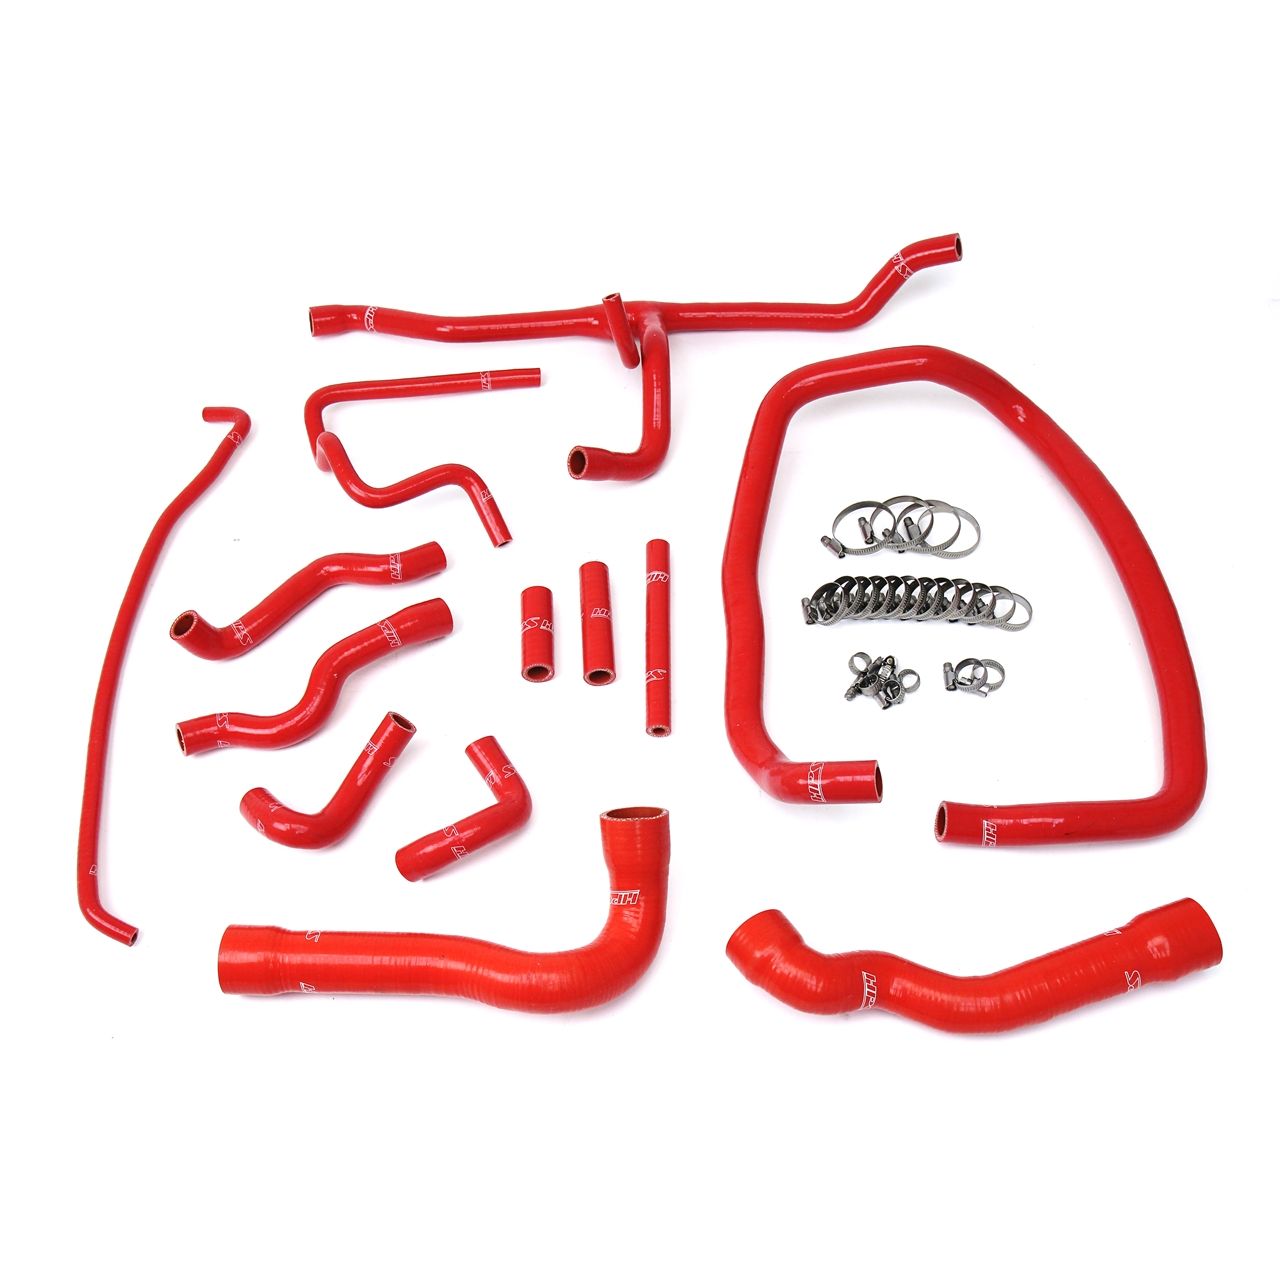 HPS Red Reinforced Silicone Radiator and Heater Hose Kit Coolant for BMW 96-99 E36 M3 Left Hand Drive